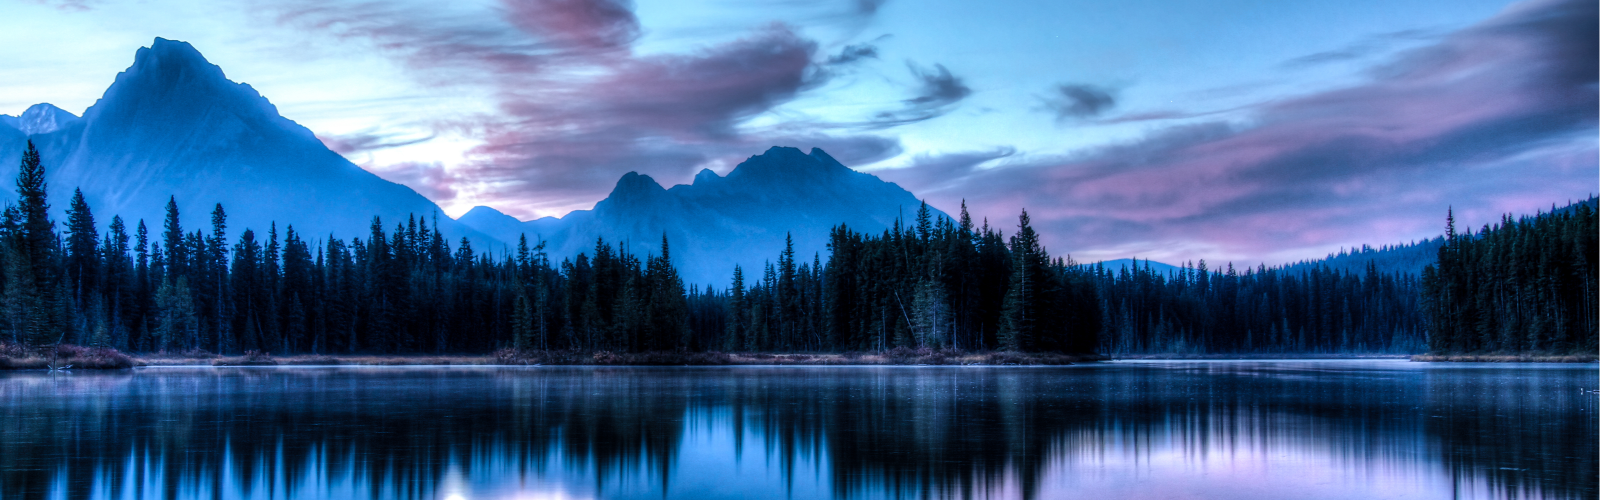 Calm mountain and lake landscape at dusk